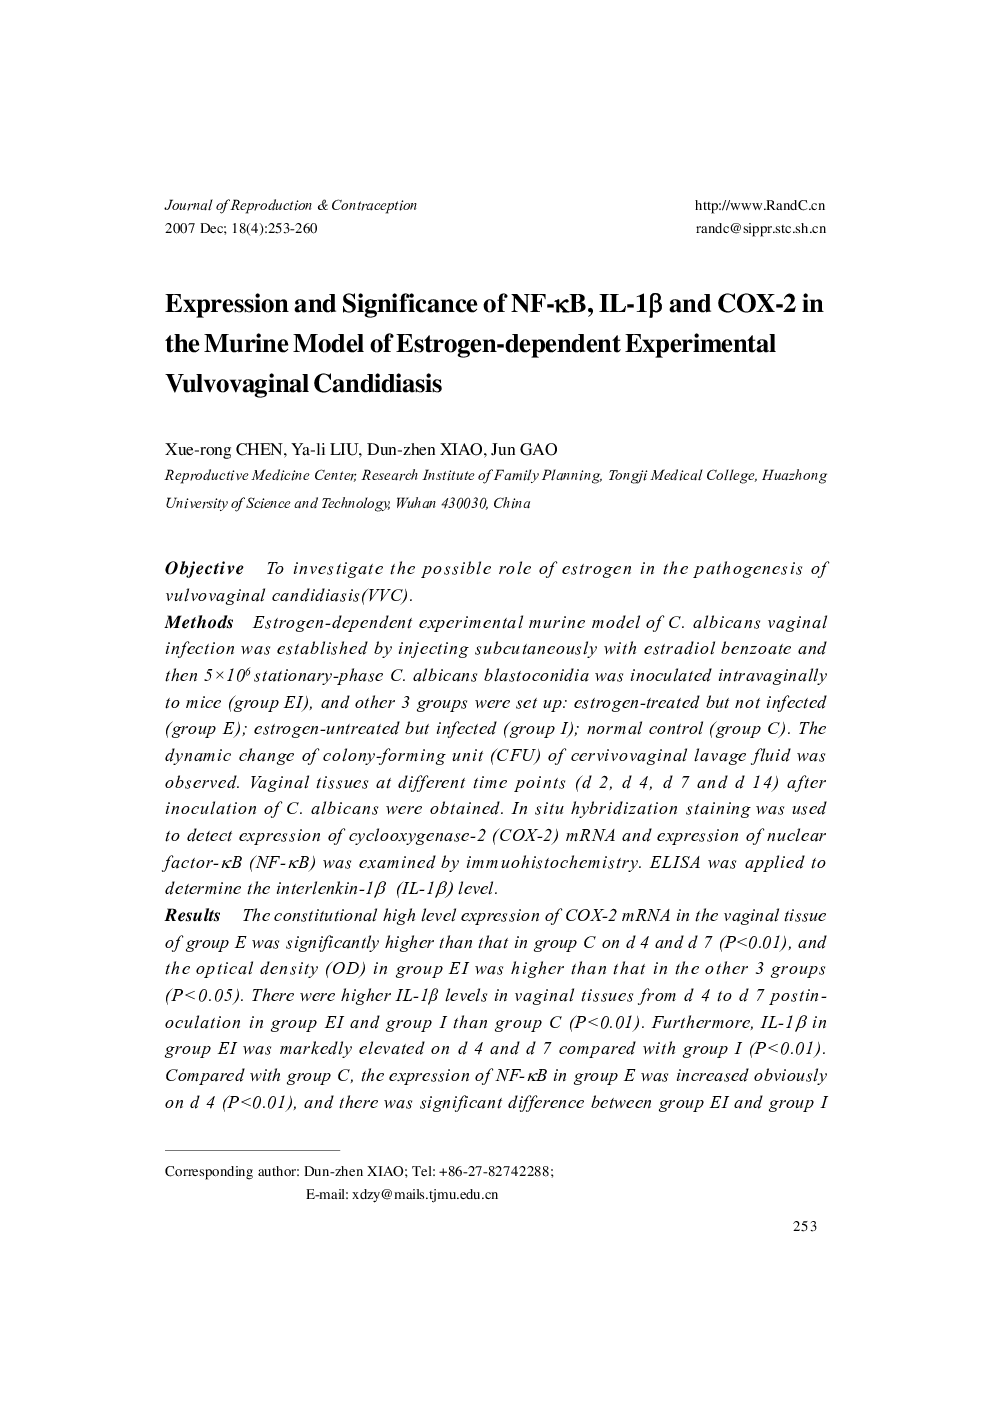 Expression and Significance of NF-κB, IL-1β and COX-2 in the Murine Model of Estrogen-dependent Experimental Vulvovaginal Candidiasis